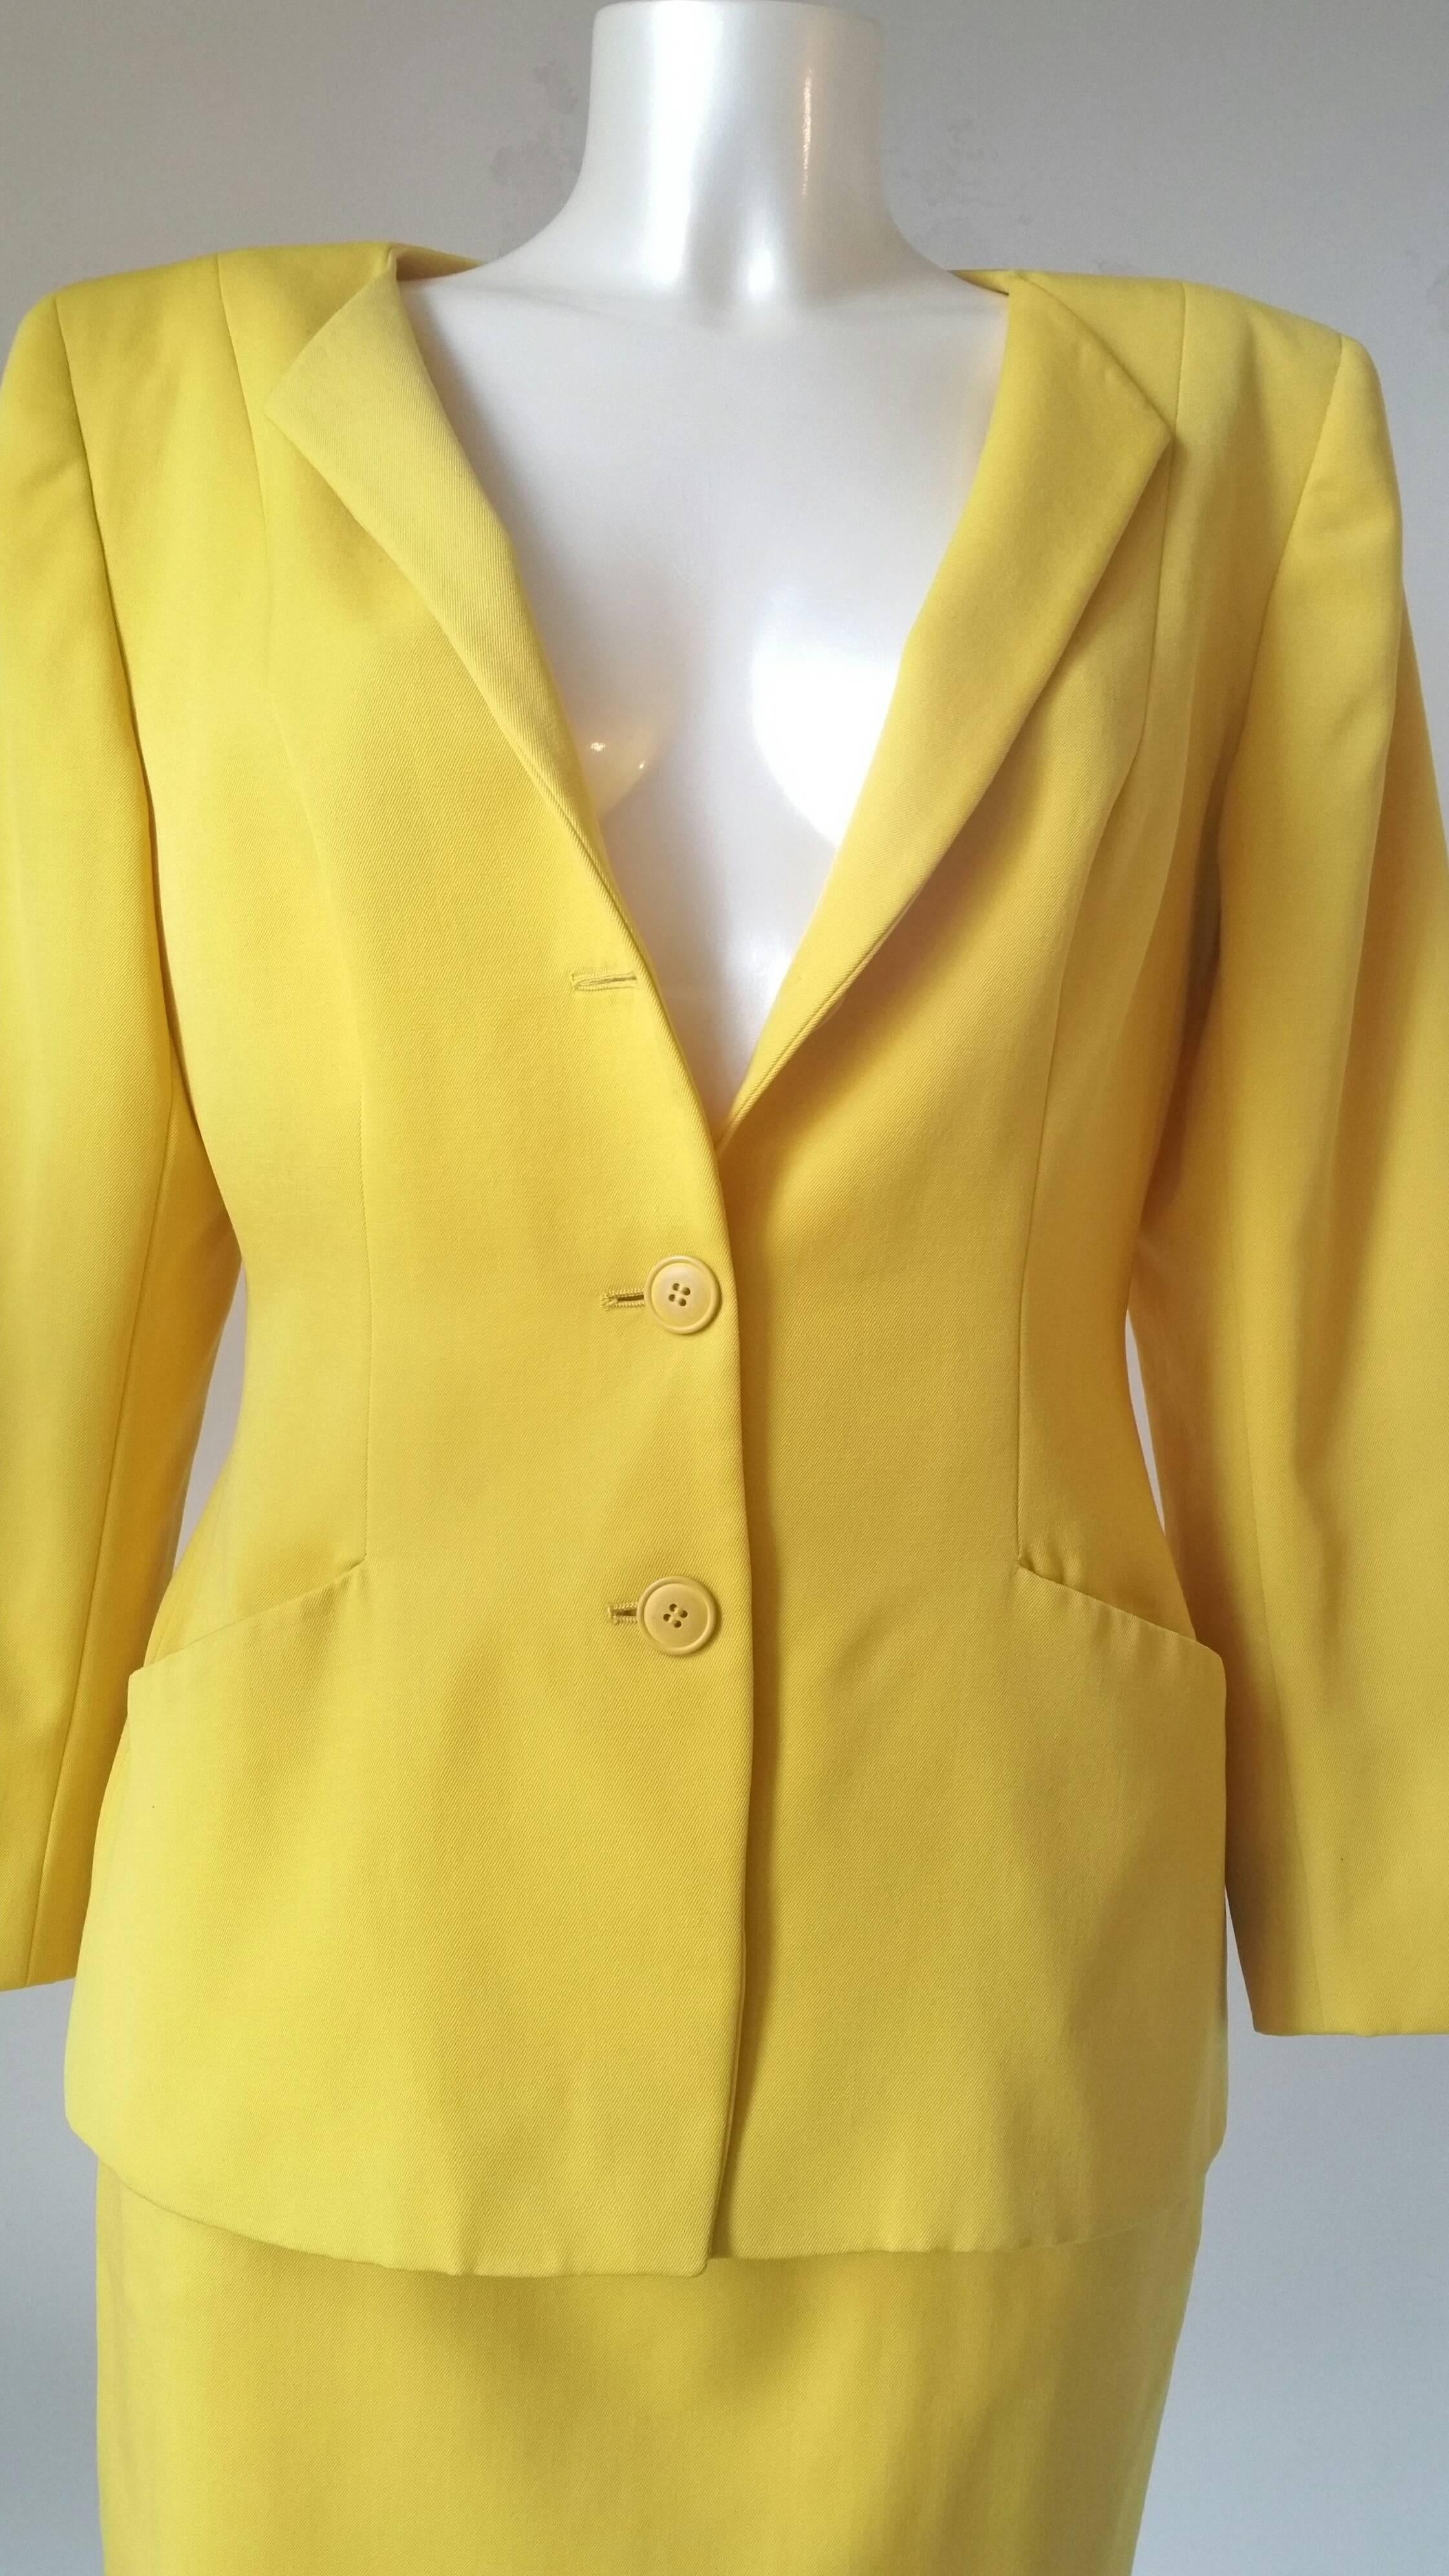 1980s Christian Dior yellow suit  
Jacket with Skirt
Size:  italian size 44
Totally made in 